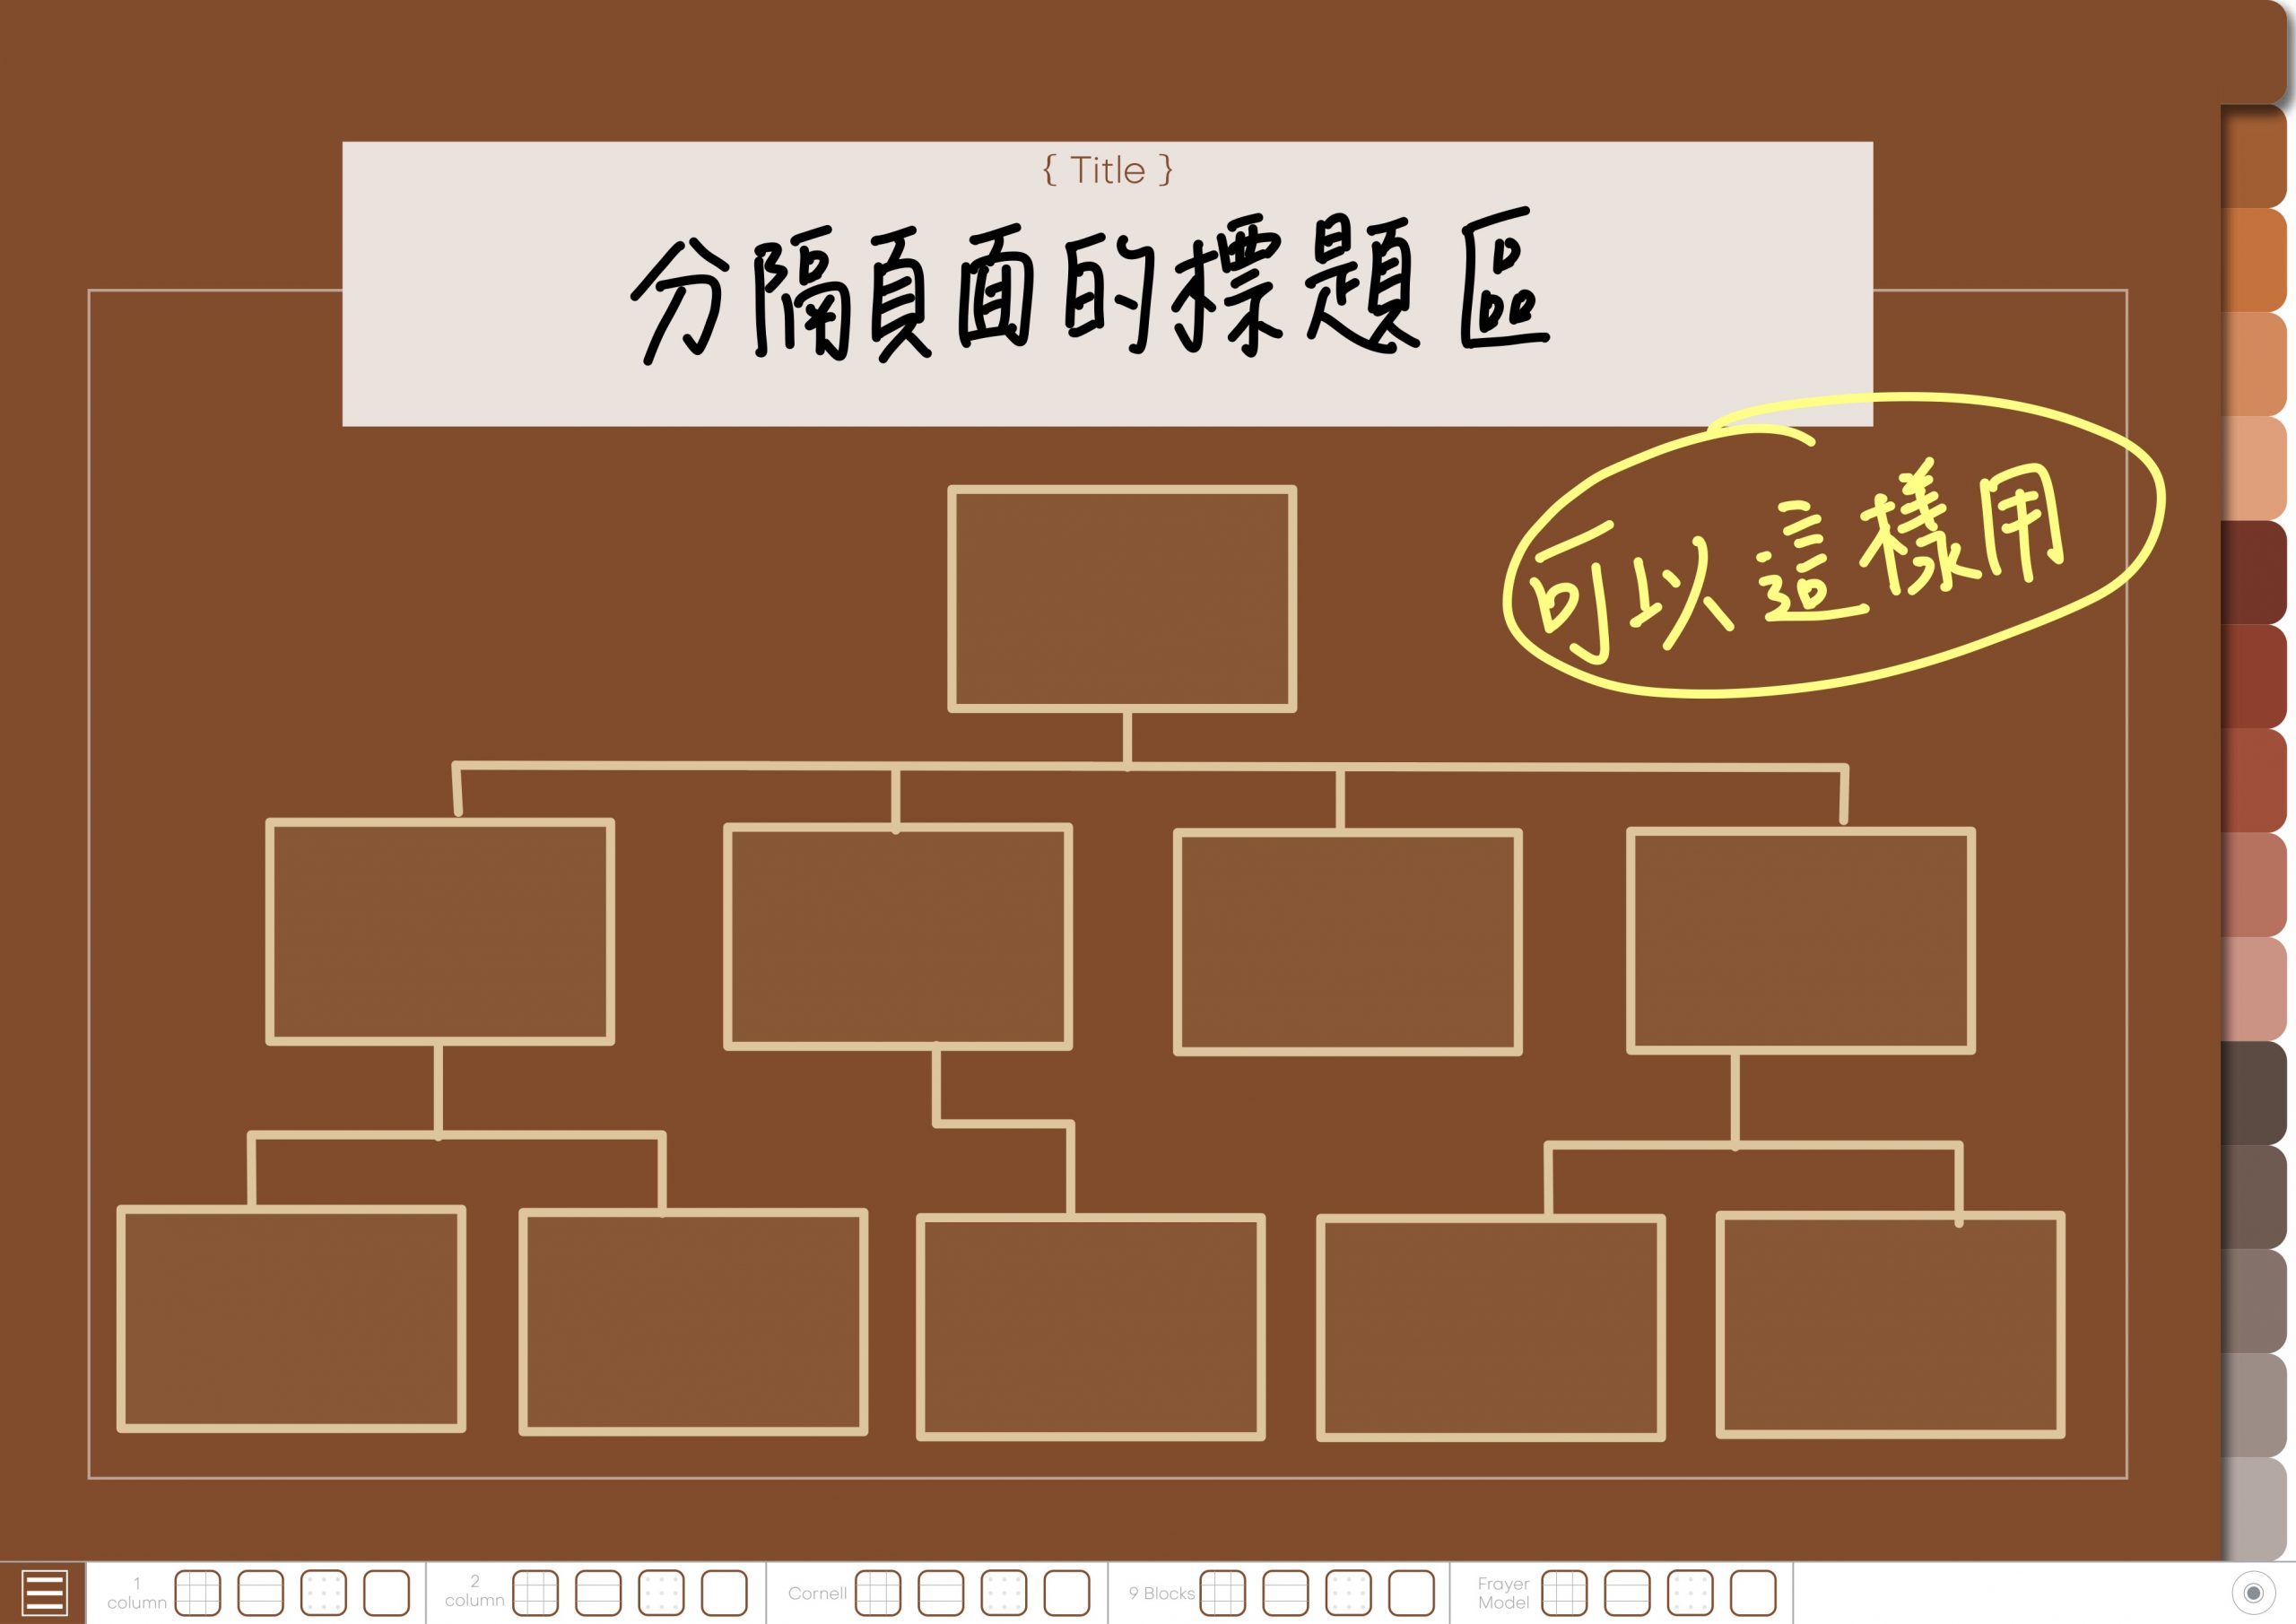 Notebook-Landscape-Solid Color Cover-15 Tabs-Toffee And Chocolate-White Mode 分隔頁使用參考1 | me.Learning